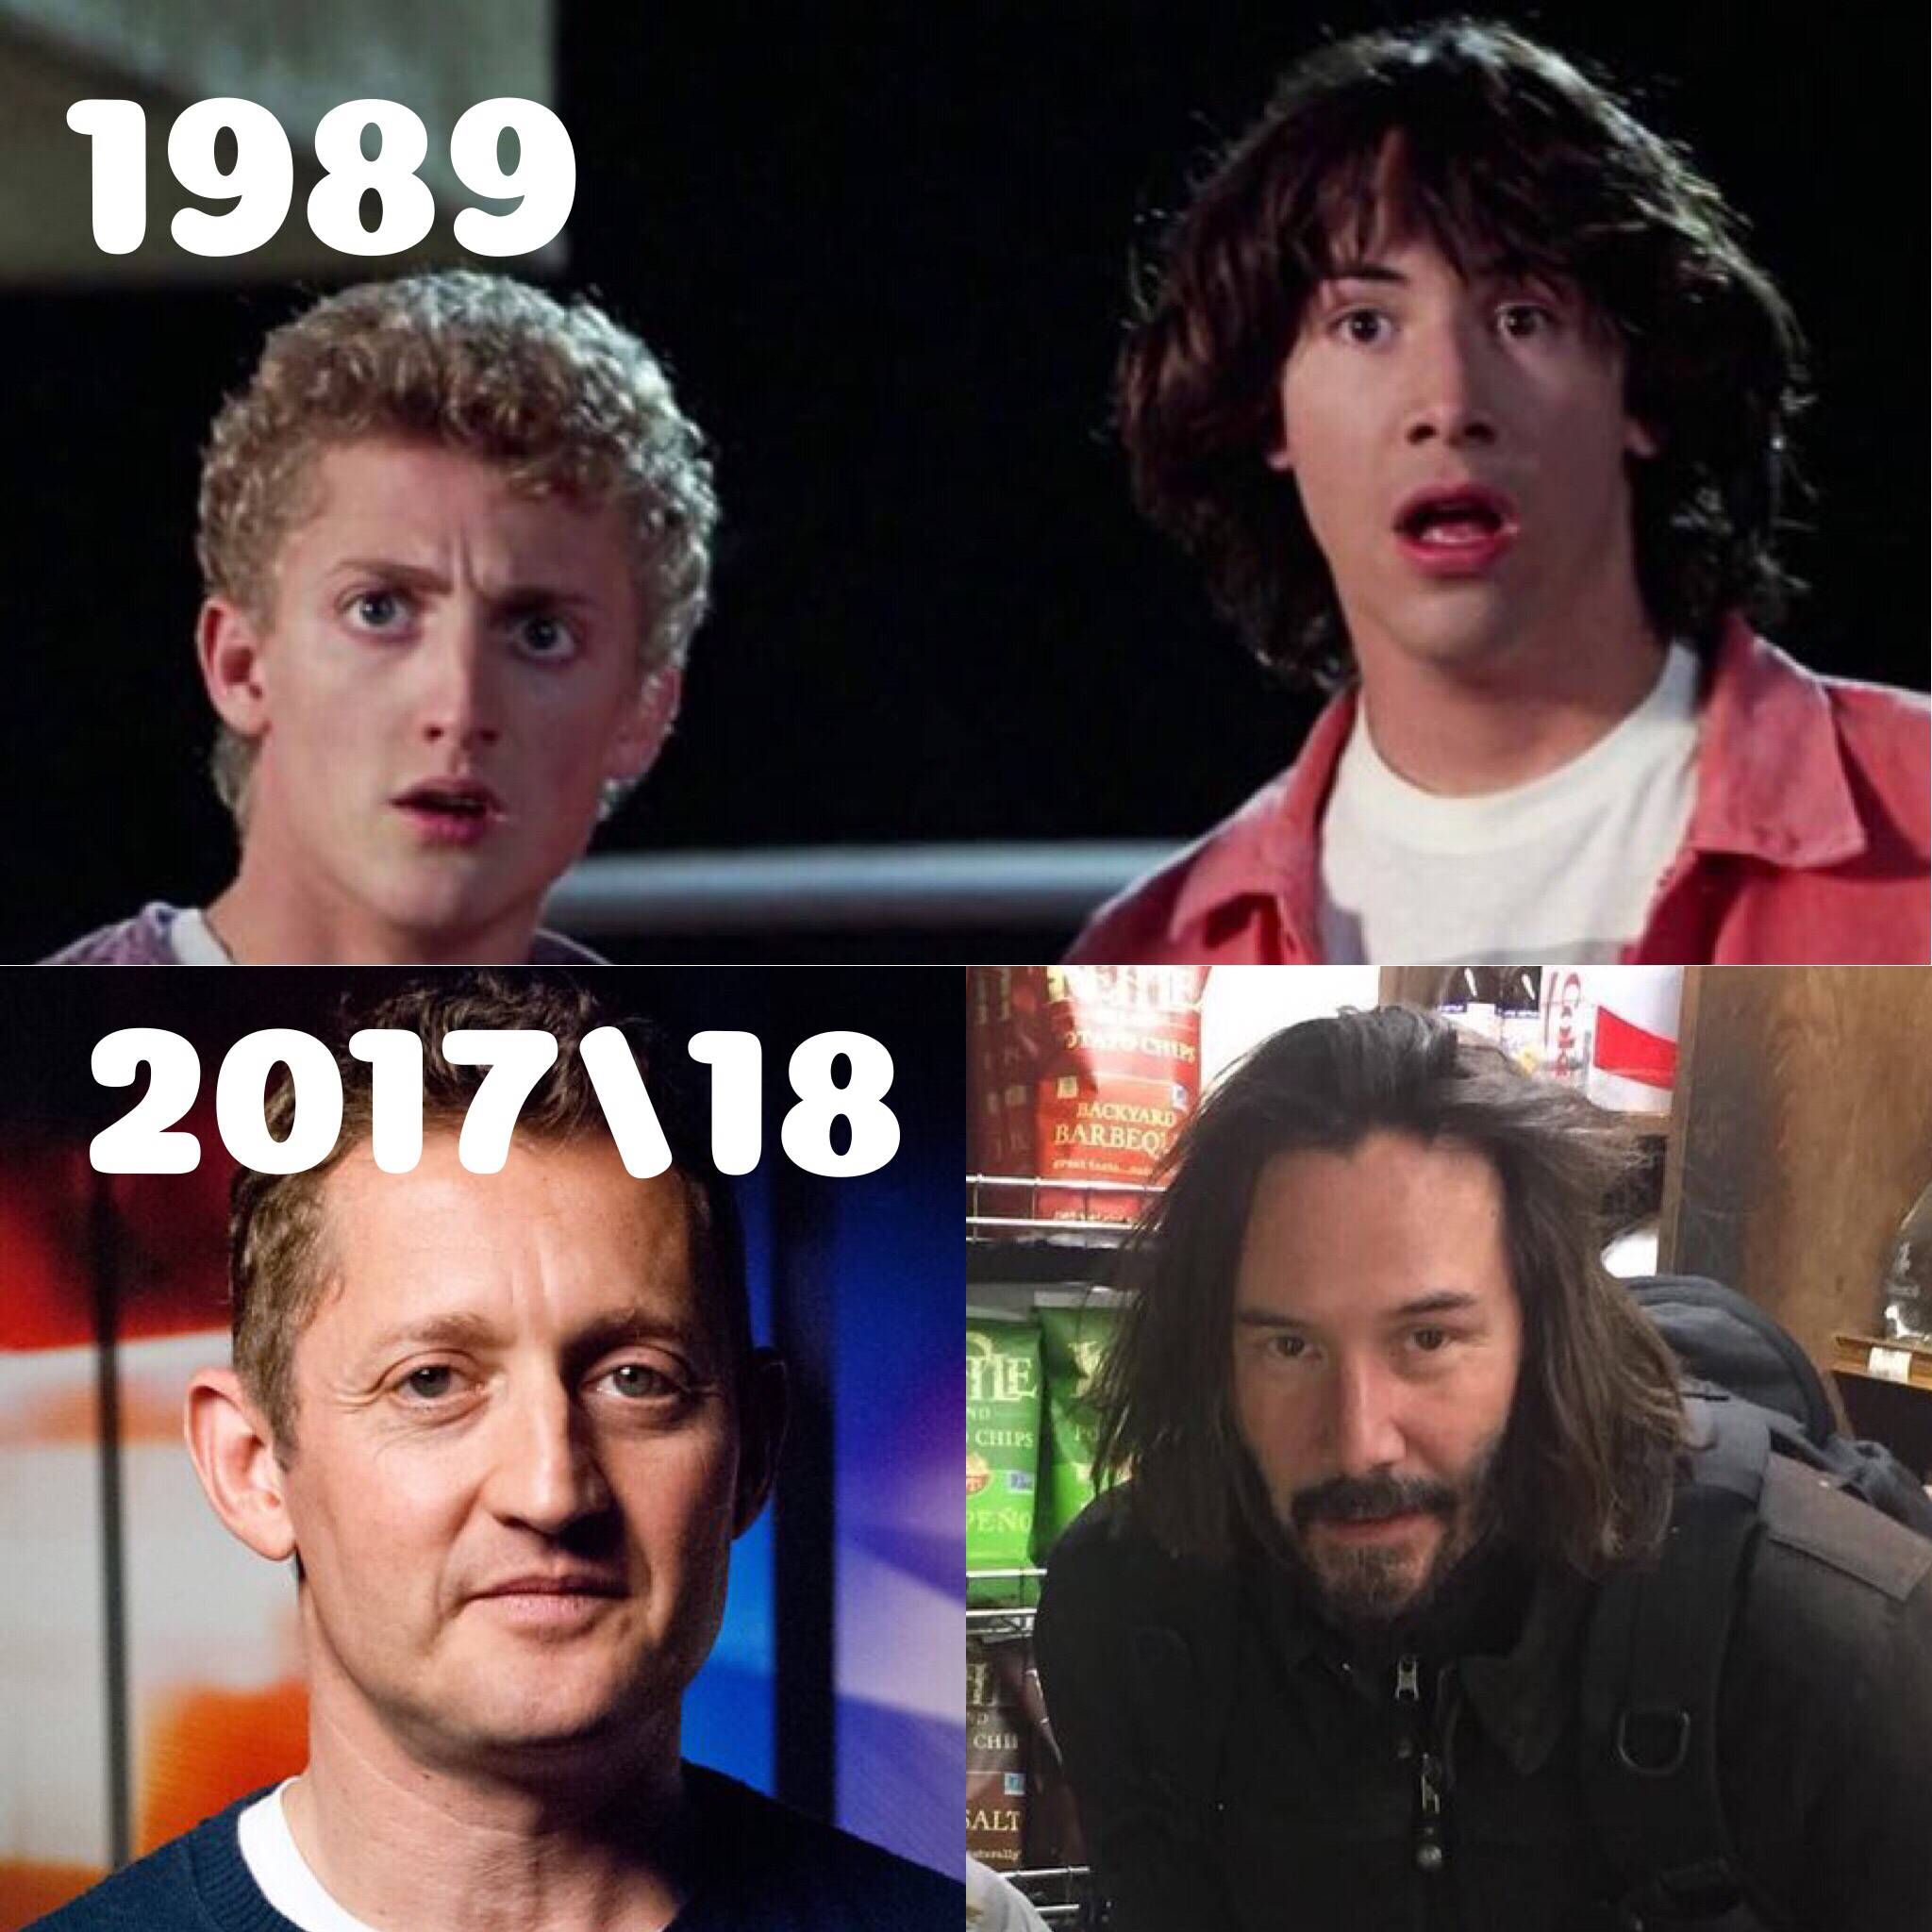 I still don’t know why they don’t make another Bill and Ted’s adventure